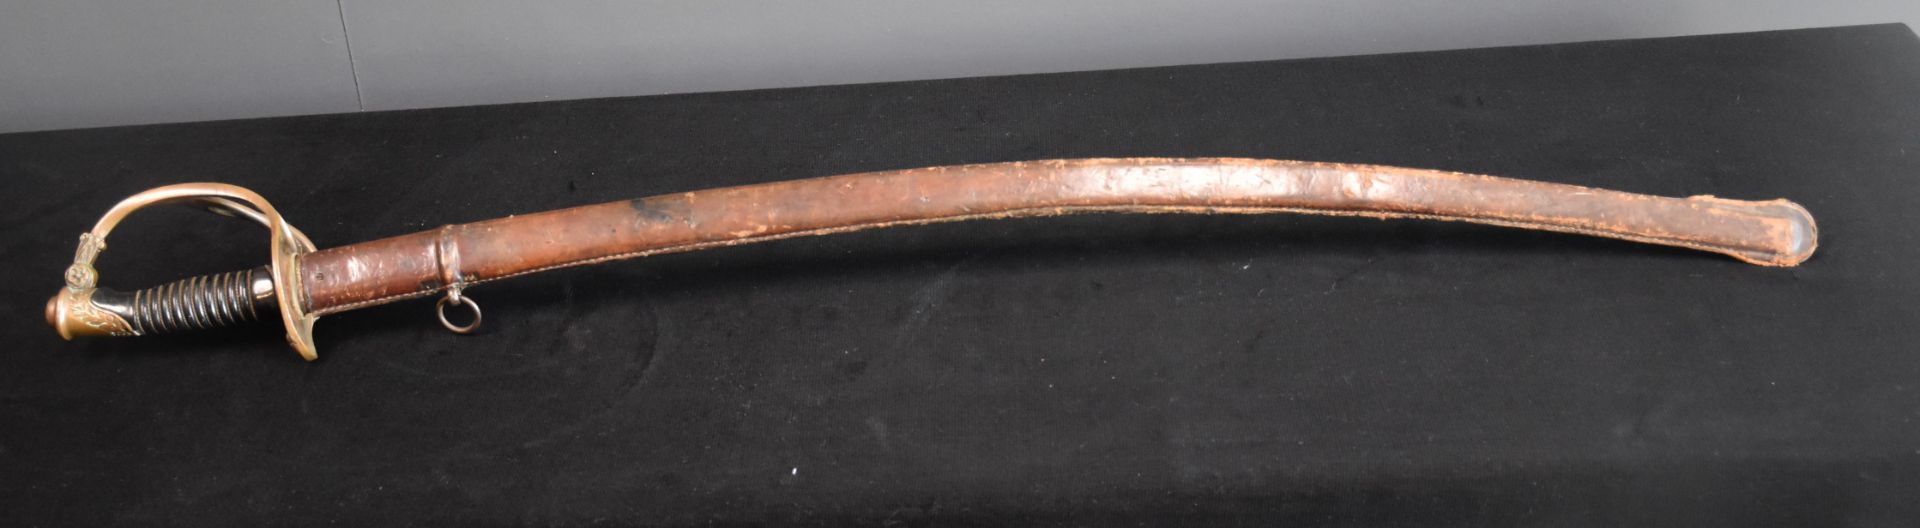 19th century French Saber, Saint Etienne, leather scabbard. - Image 2 of 6